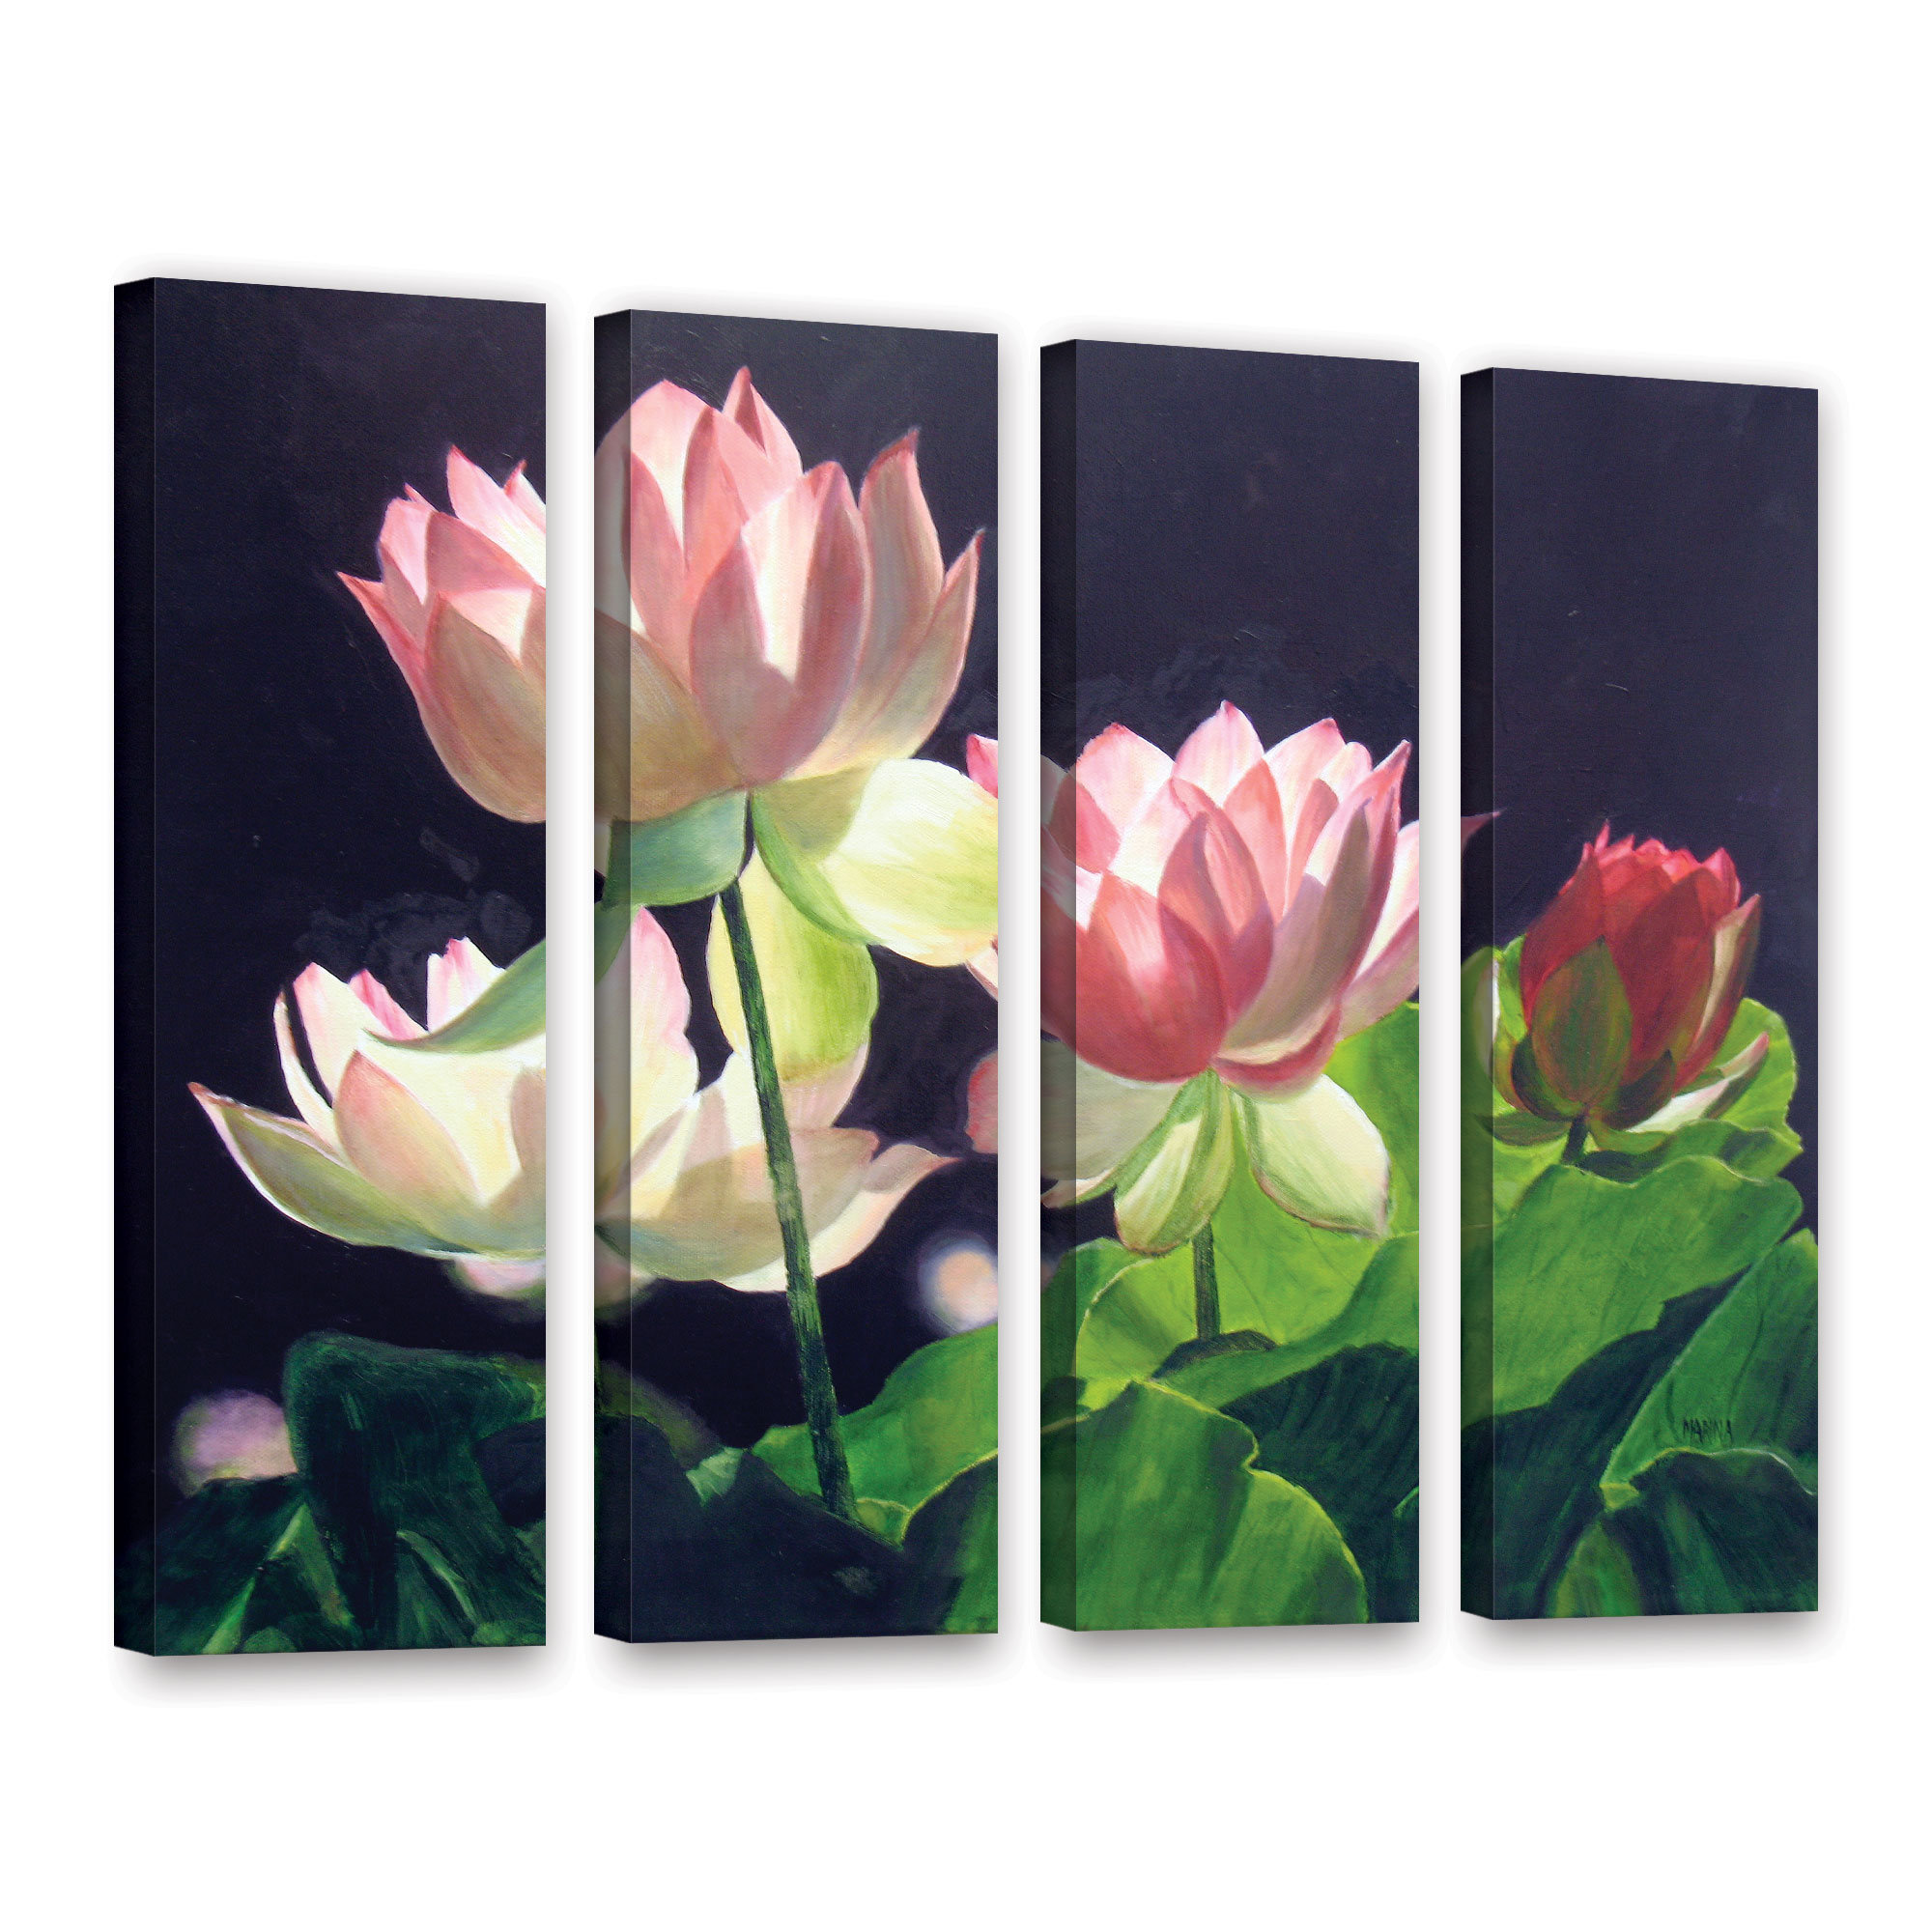 ArtWall Marina Petros in The Pink 4 Piece Gallery-Wrapped Canvas Set 36 by 48 